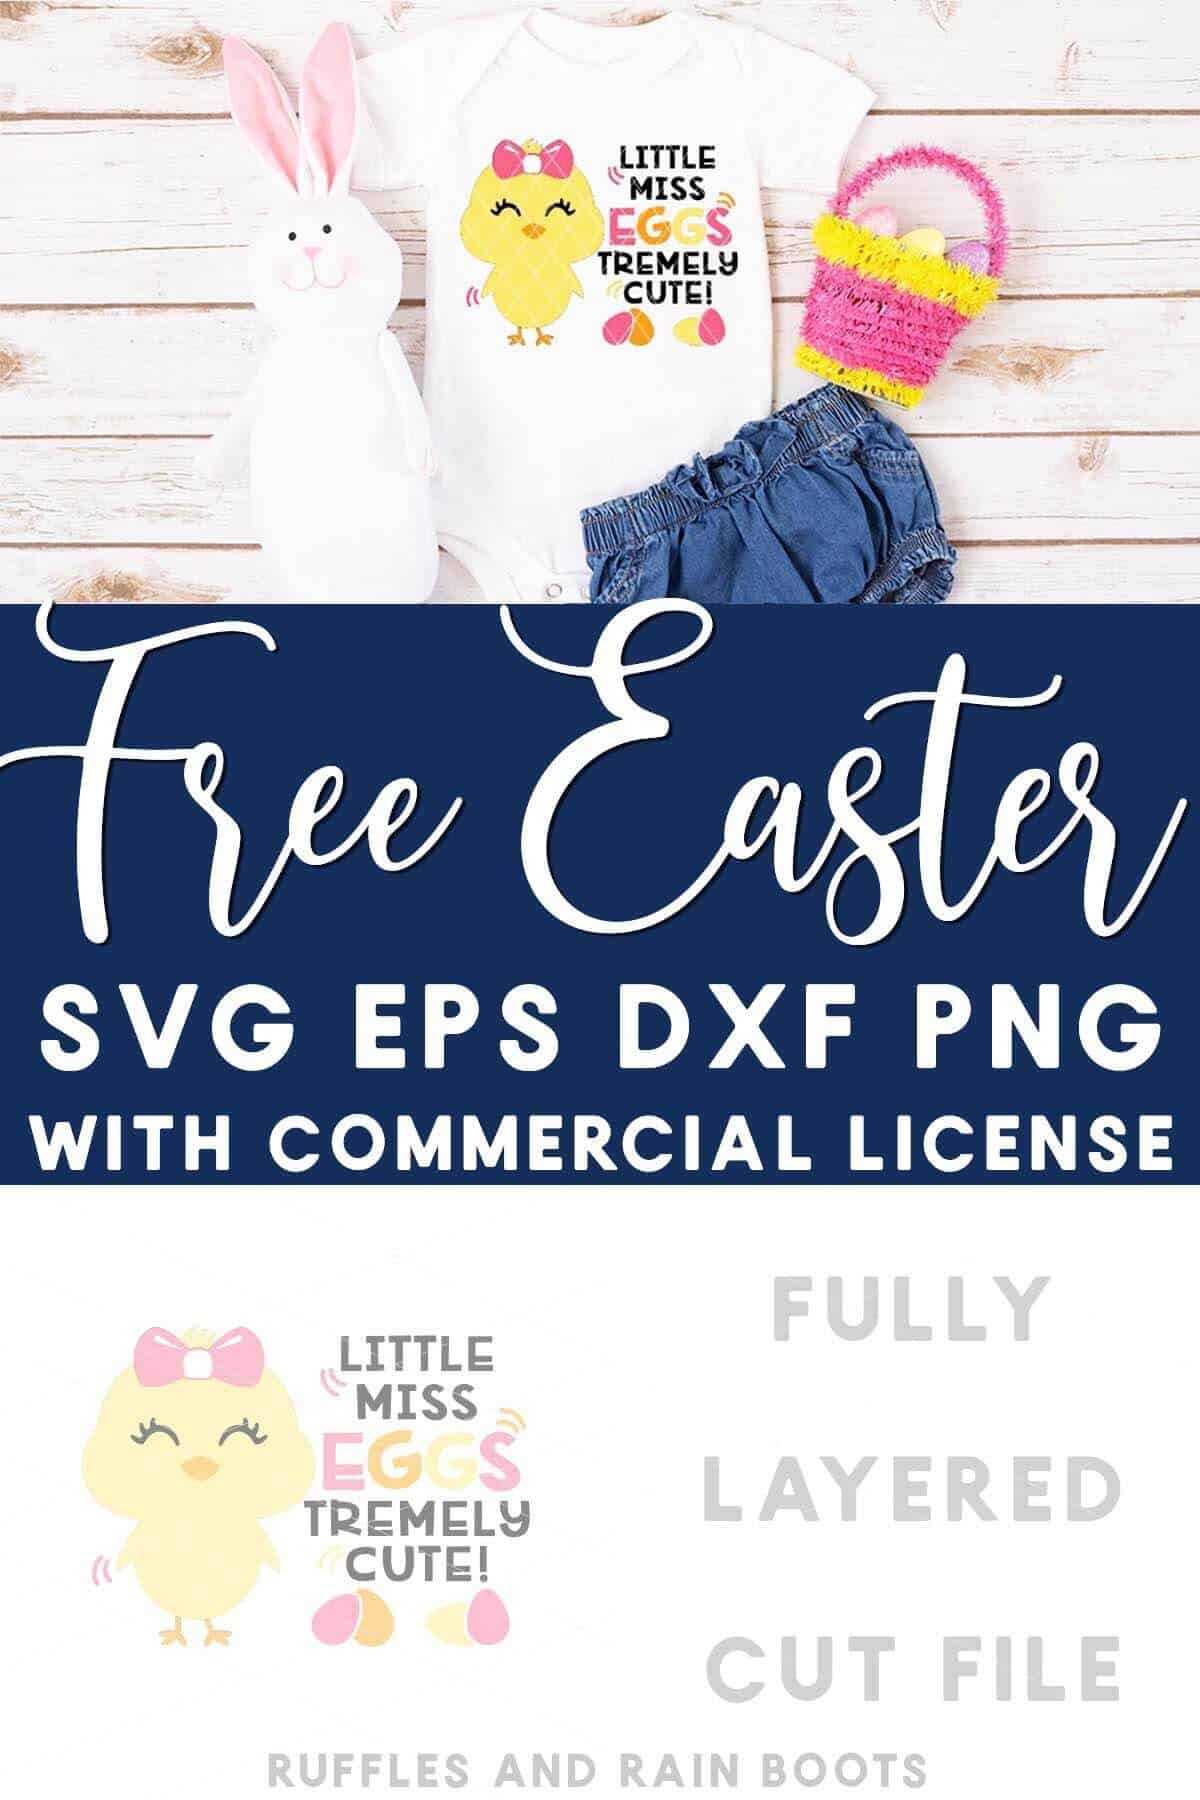 Adorable Easter SVG for Little Miss EGGStremely cute SVG placed on a white body suit with a bunny stuffed animal, basket with eggs, and jean bloomers on a white wood background with text which reads Free Easter SVG EPS DXF PNG commercial license.